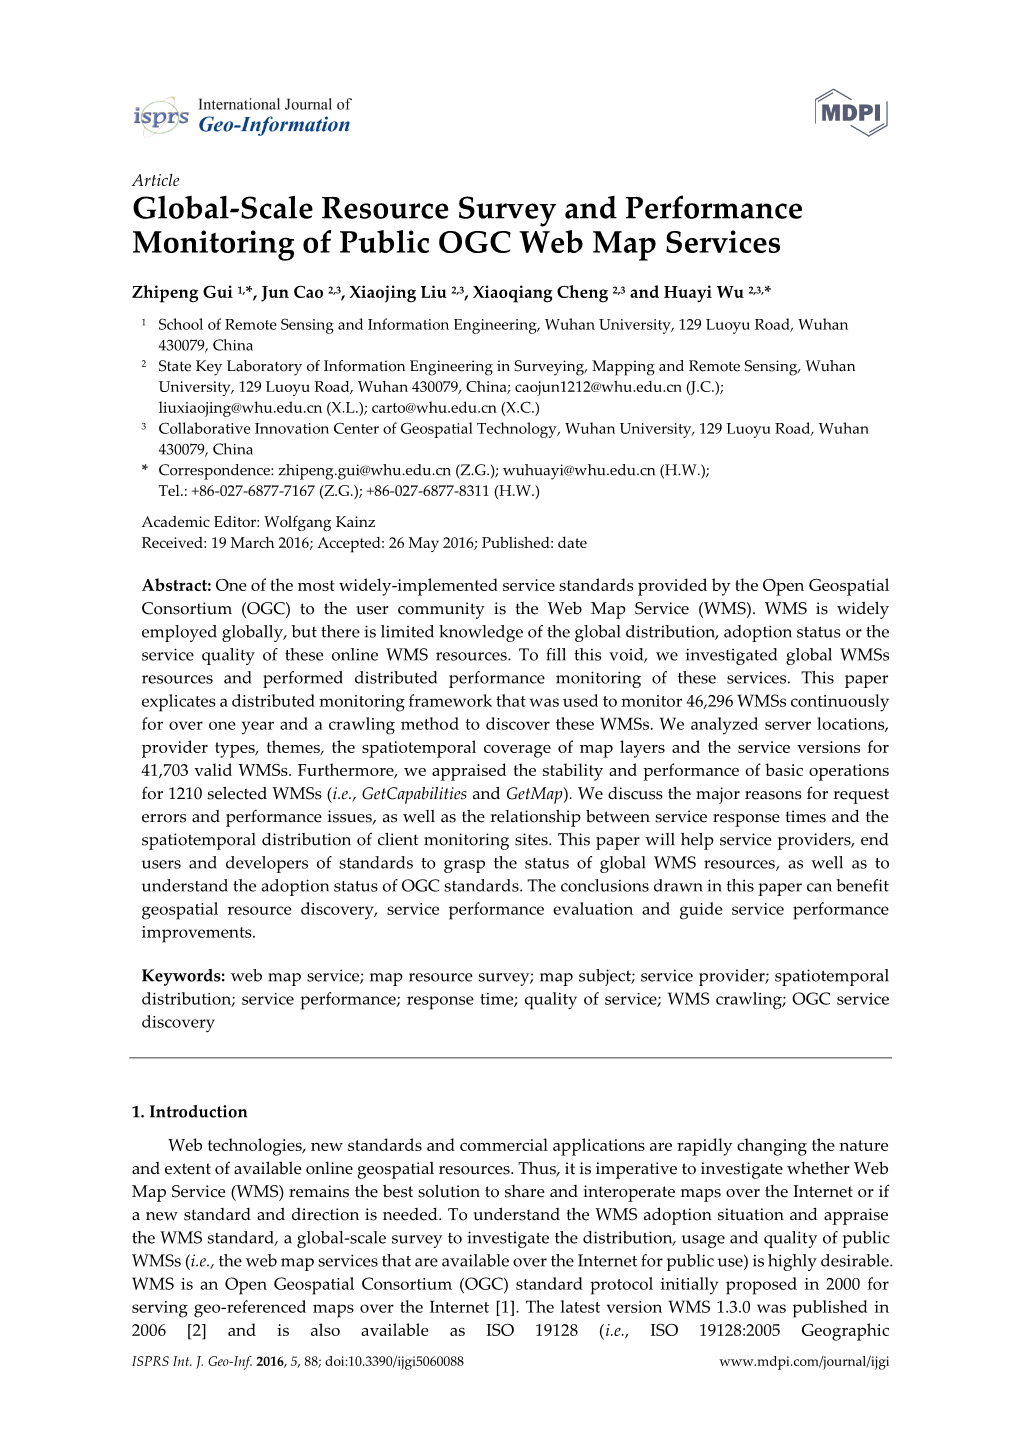 Global-Scale Resource Survey and Performance Monitoring of Public OGC Web Map Services